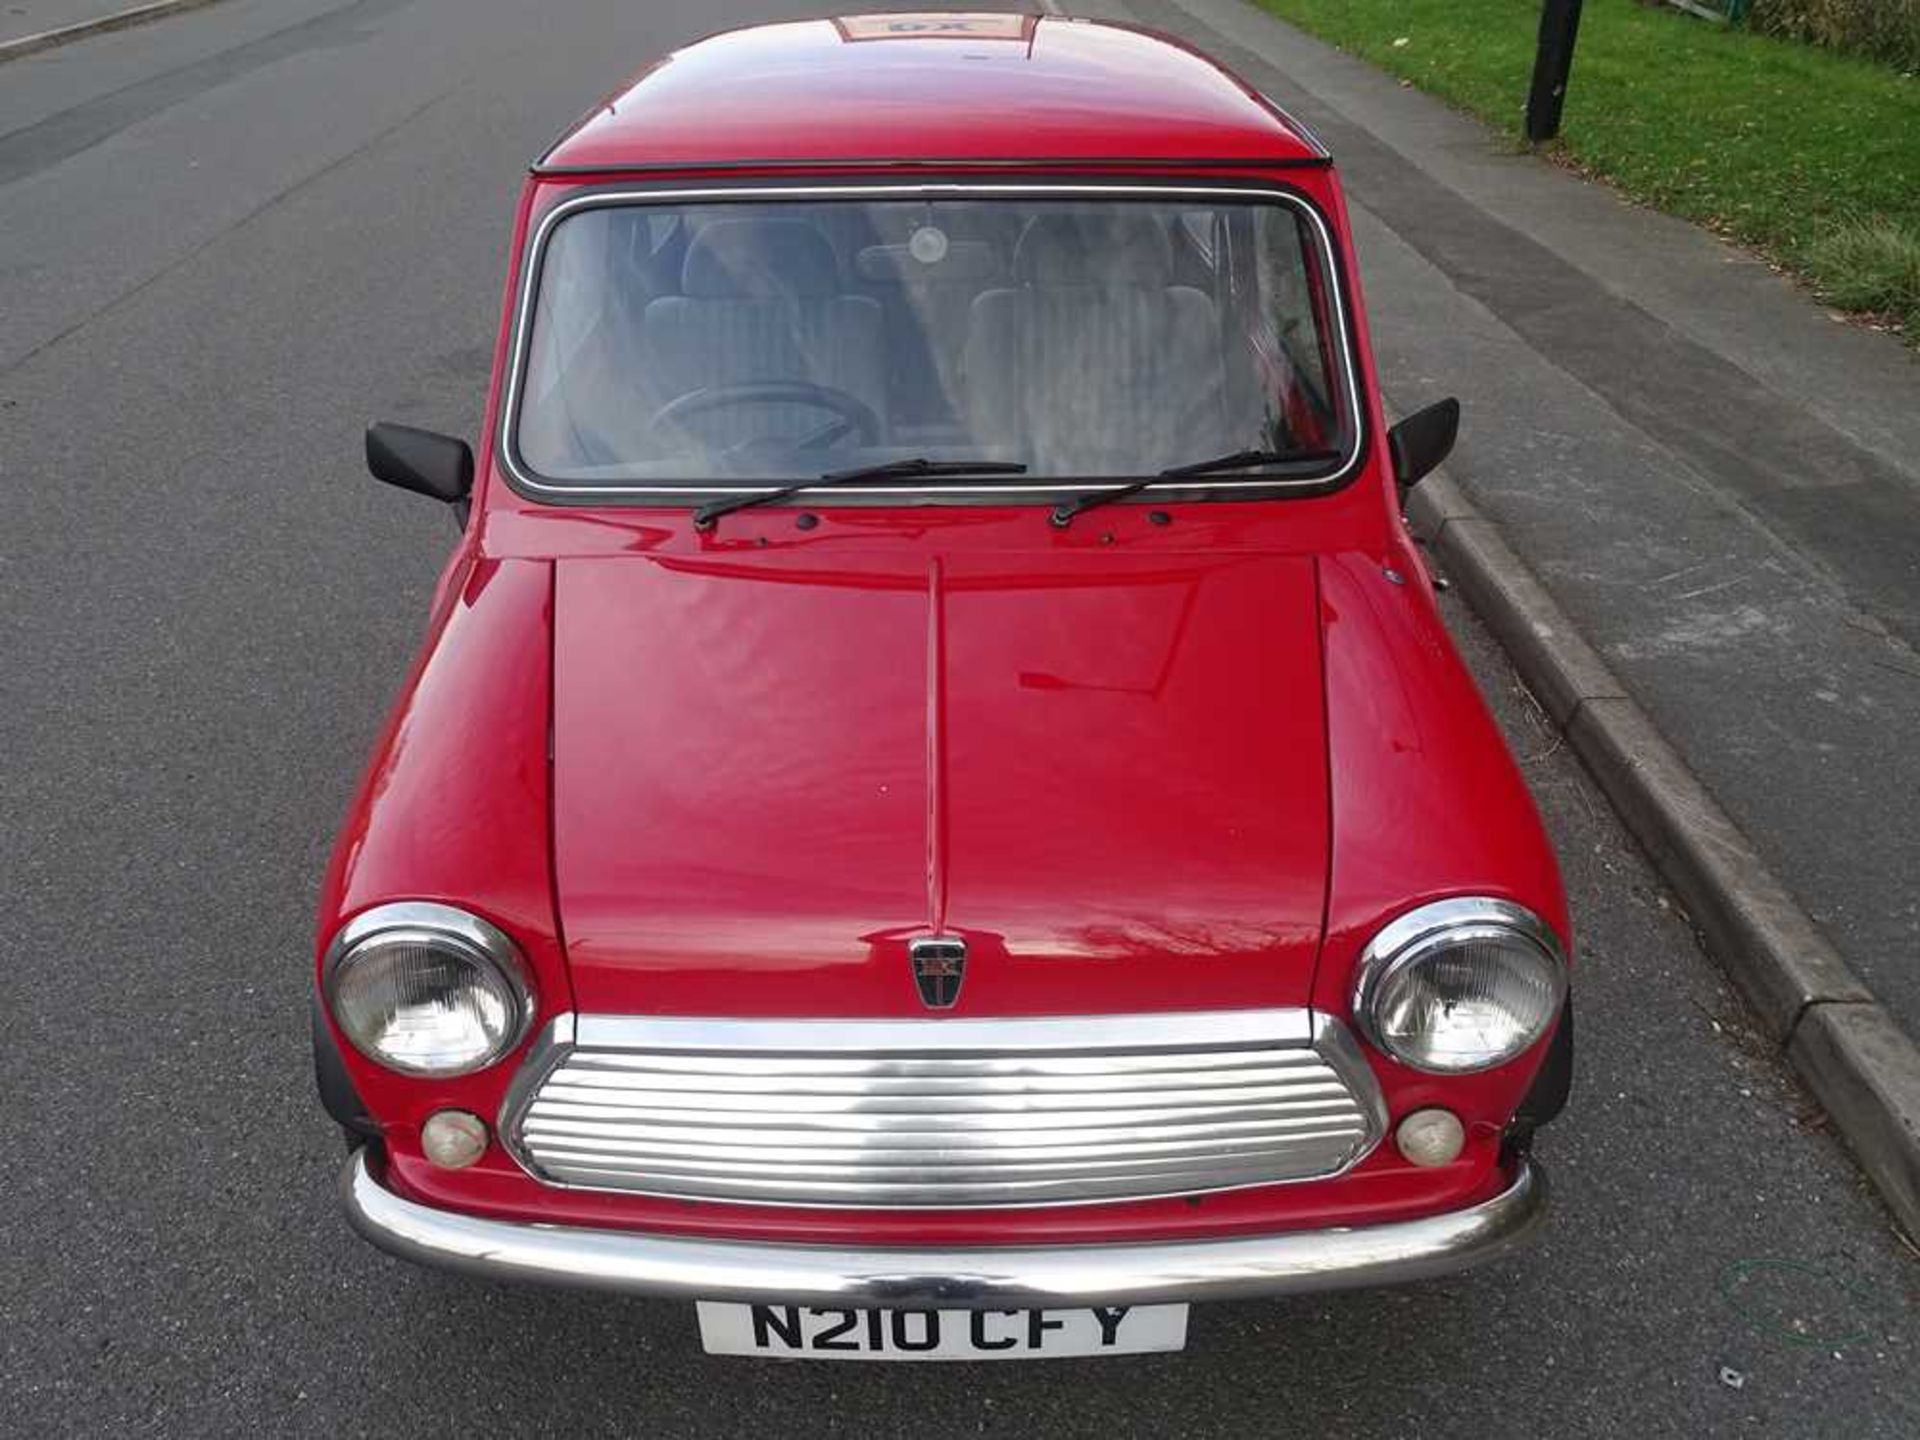 1995 Rover Mini Sprite Only c.22,500 miles from new - Image 4 of 52